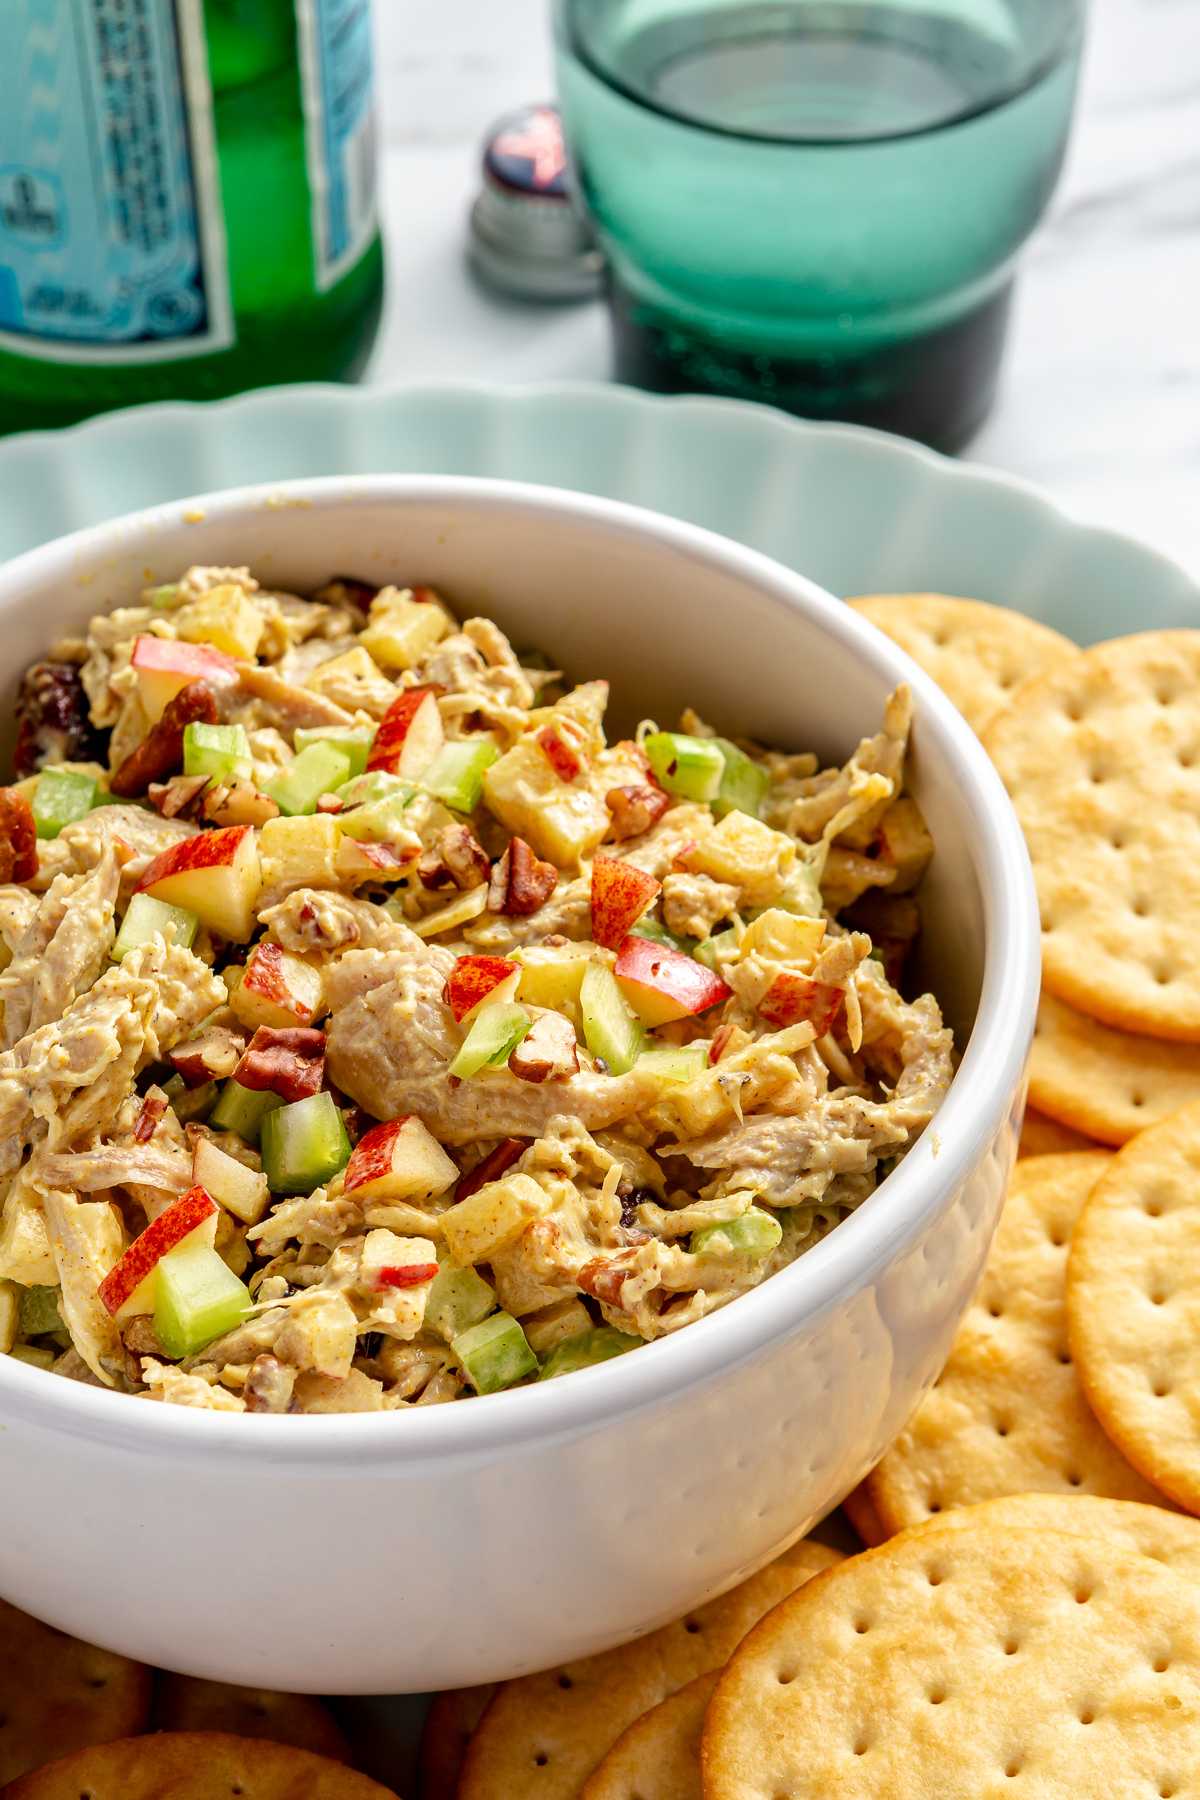 Curried chicken salad in white bowl served with crackers.